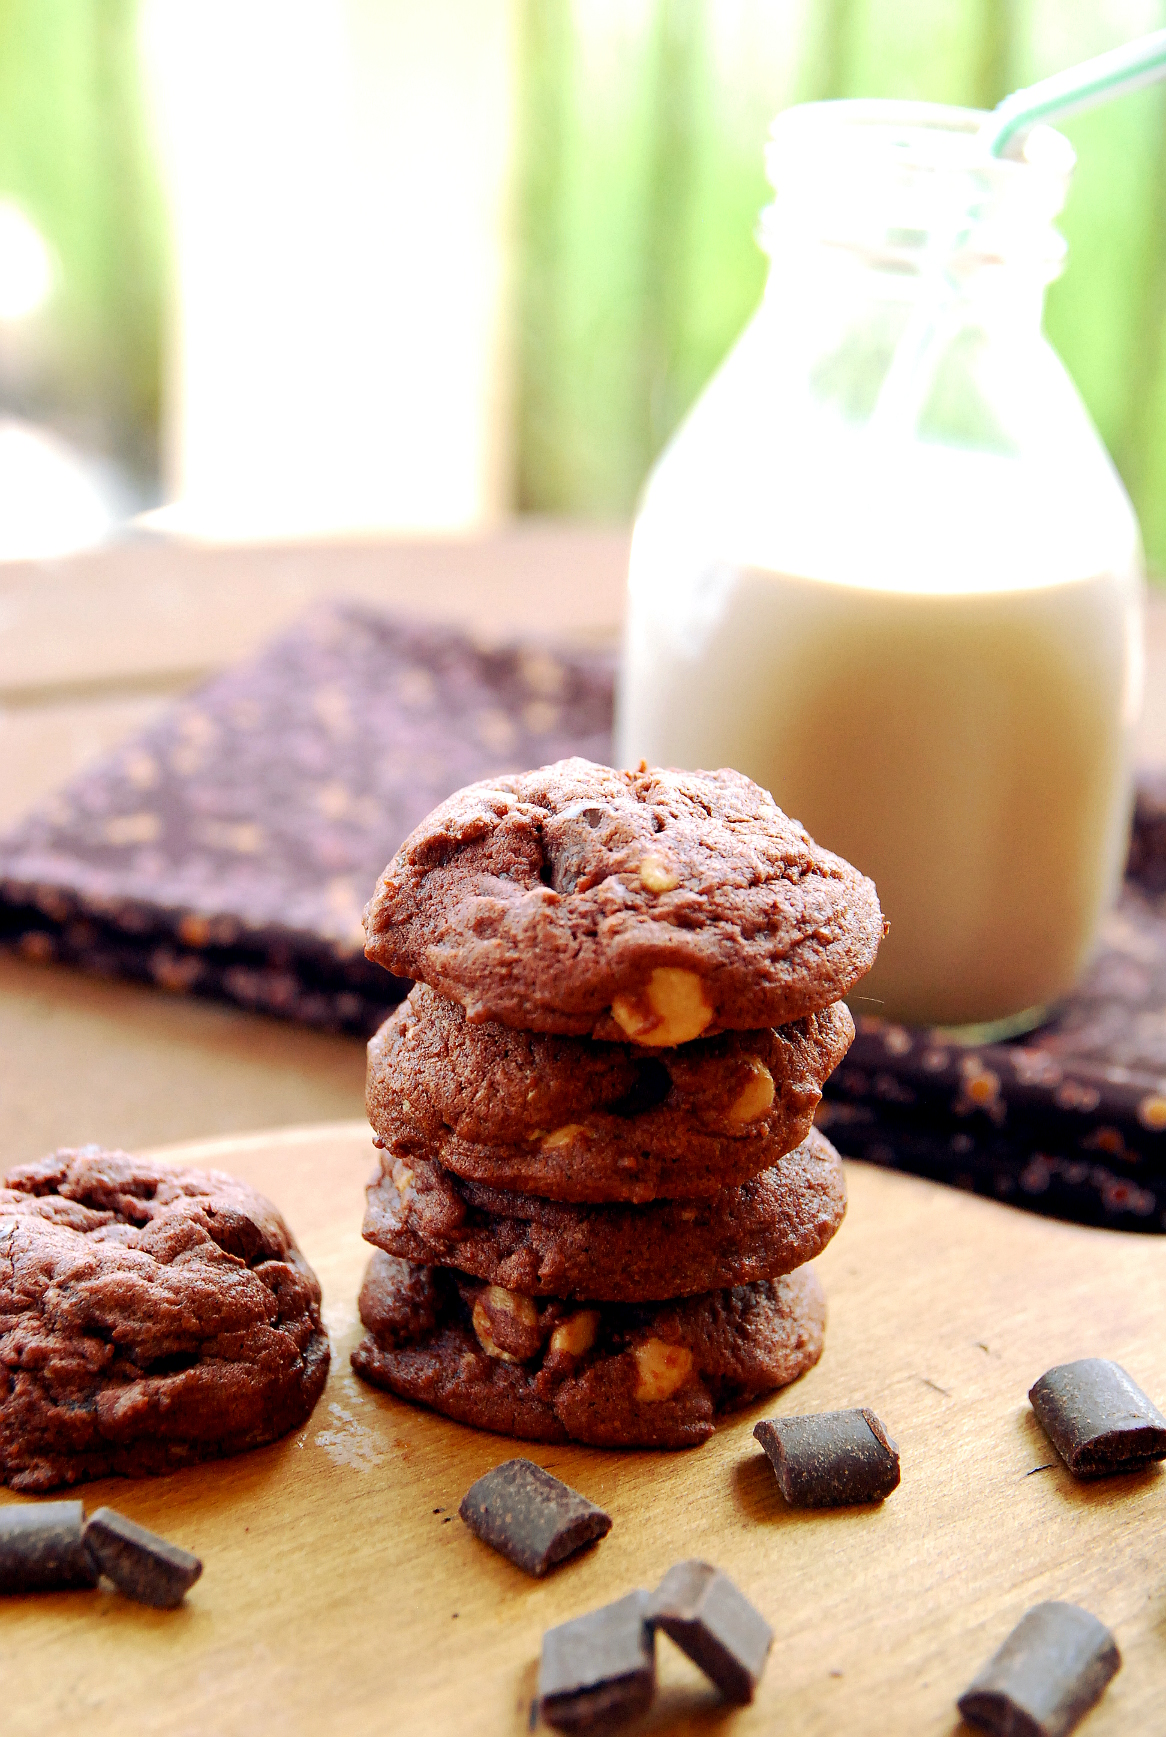 Chocolate Peanut Butter Pudding Cookies